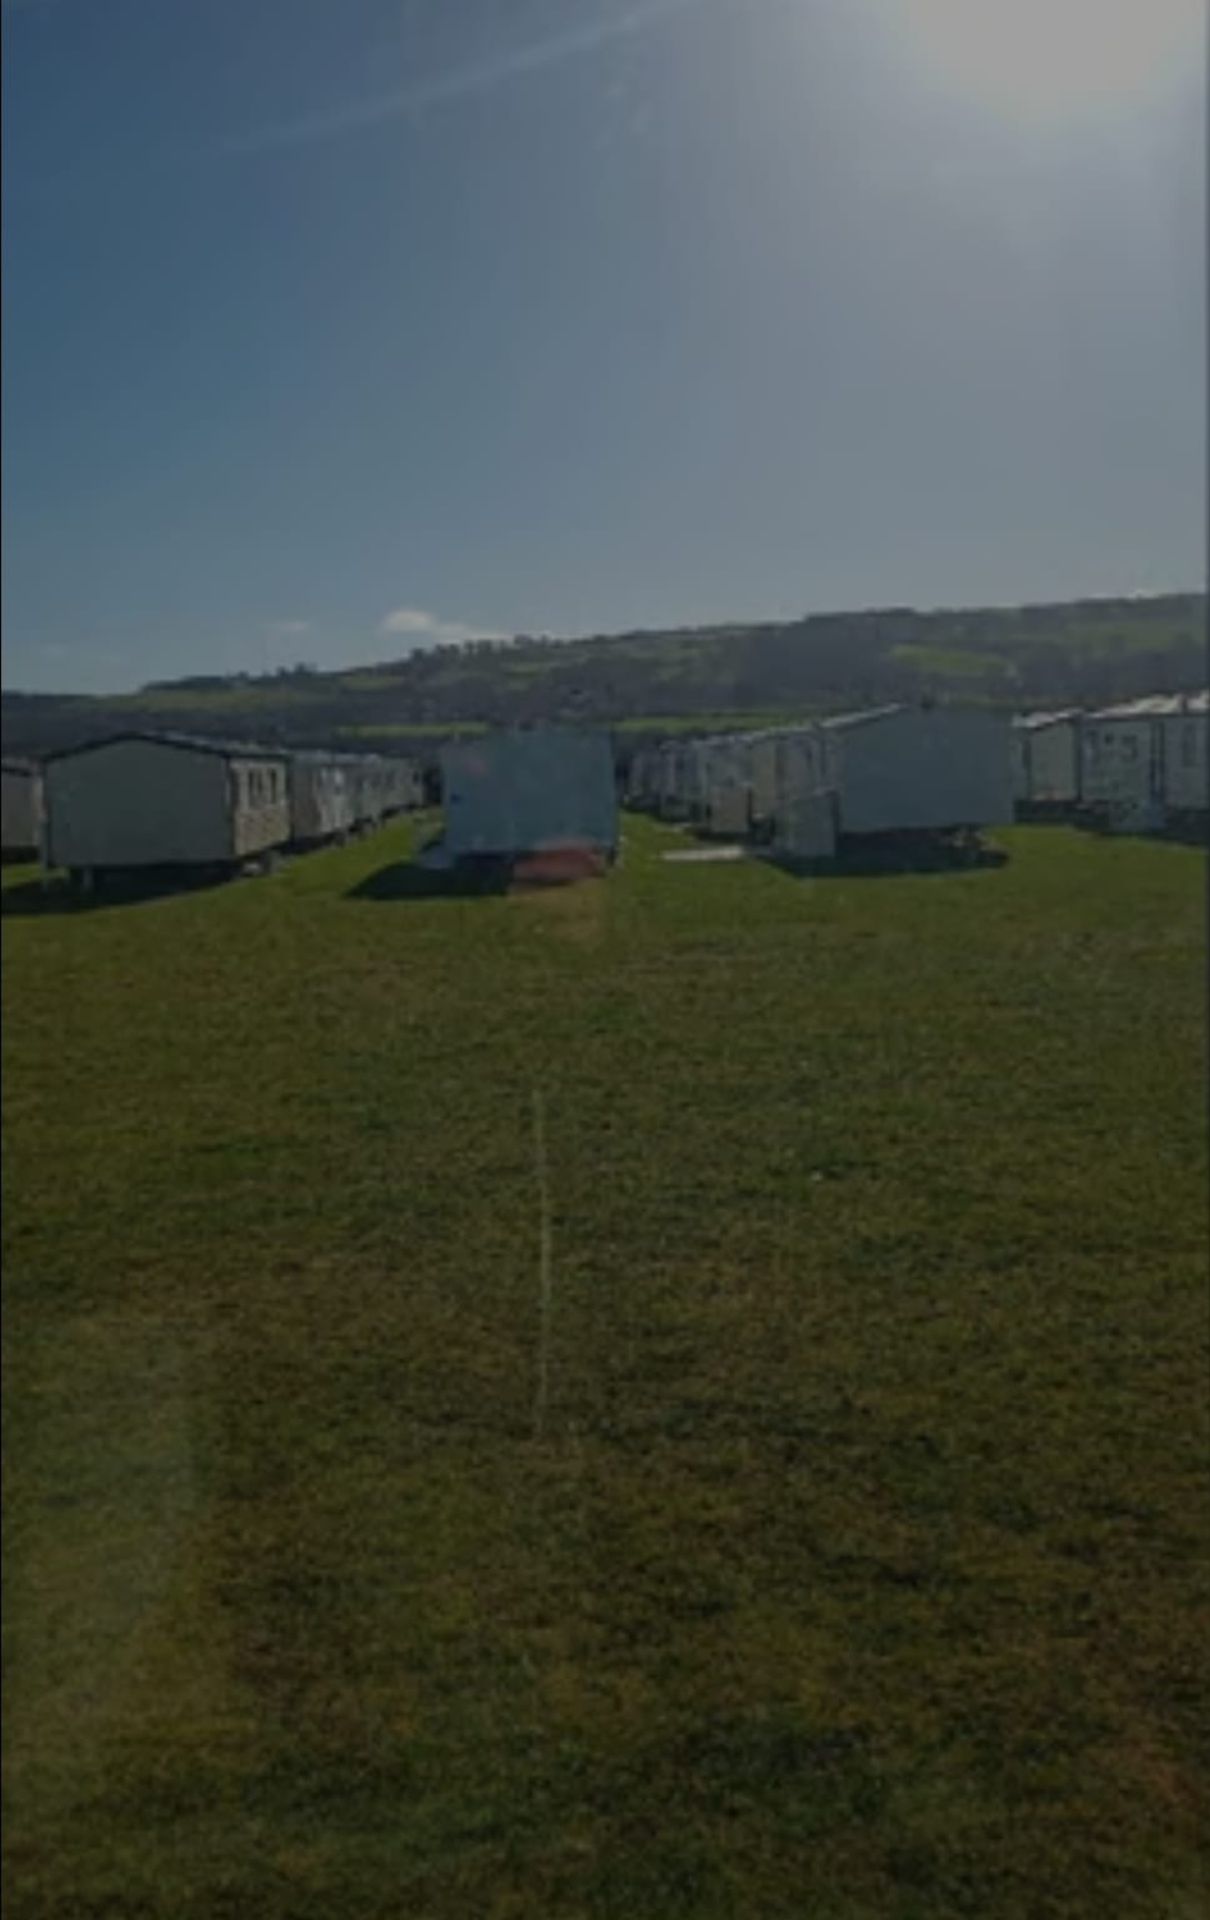 2015 WILLERBY ECO SALSA 3 BEDROOM holiday home ON-SITE SALE. **ON SALE** - Image 7 of 13